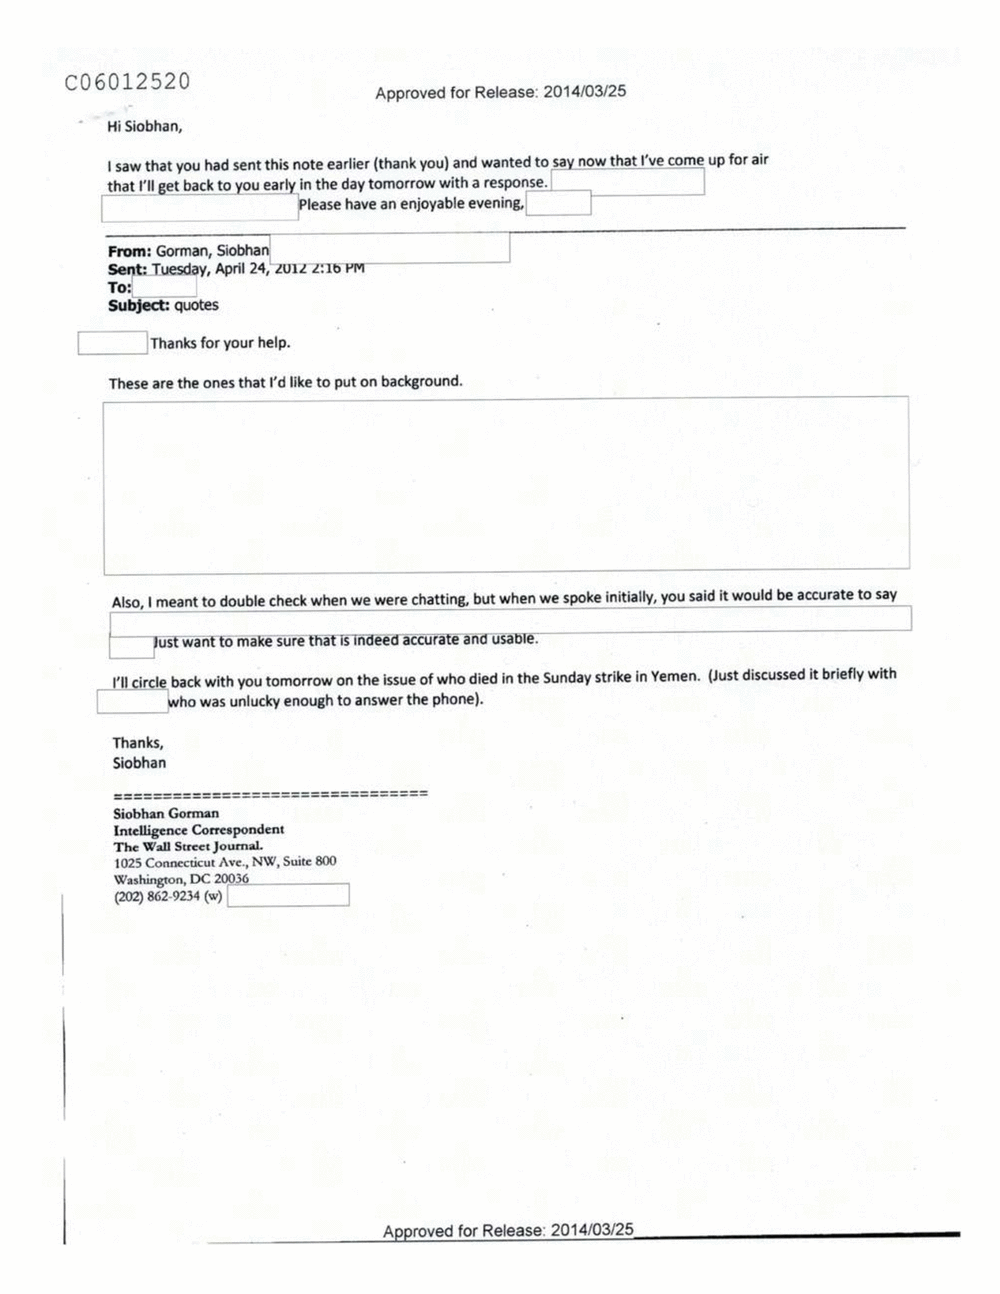 Page 41 from Email Correspondence Between Reporters and CIA Flacks